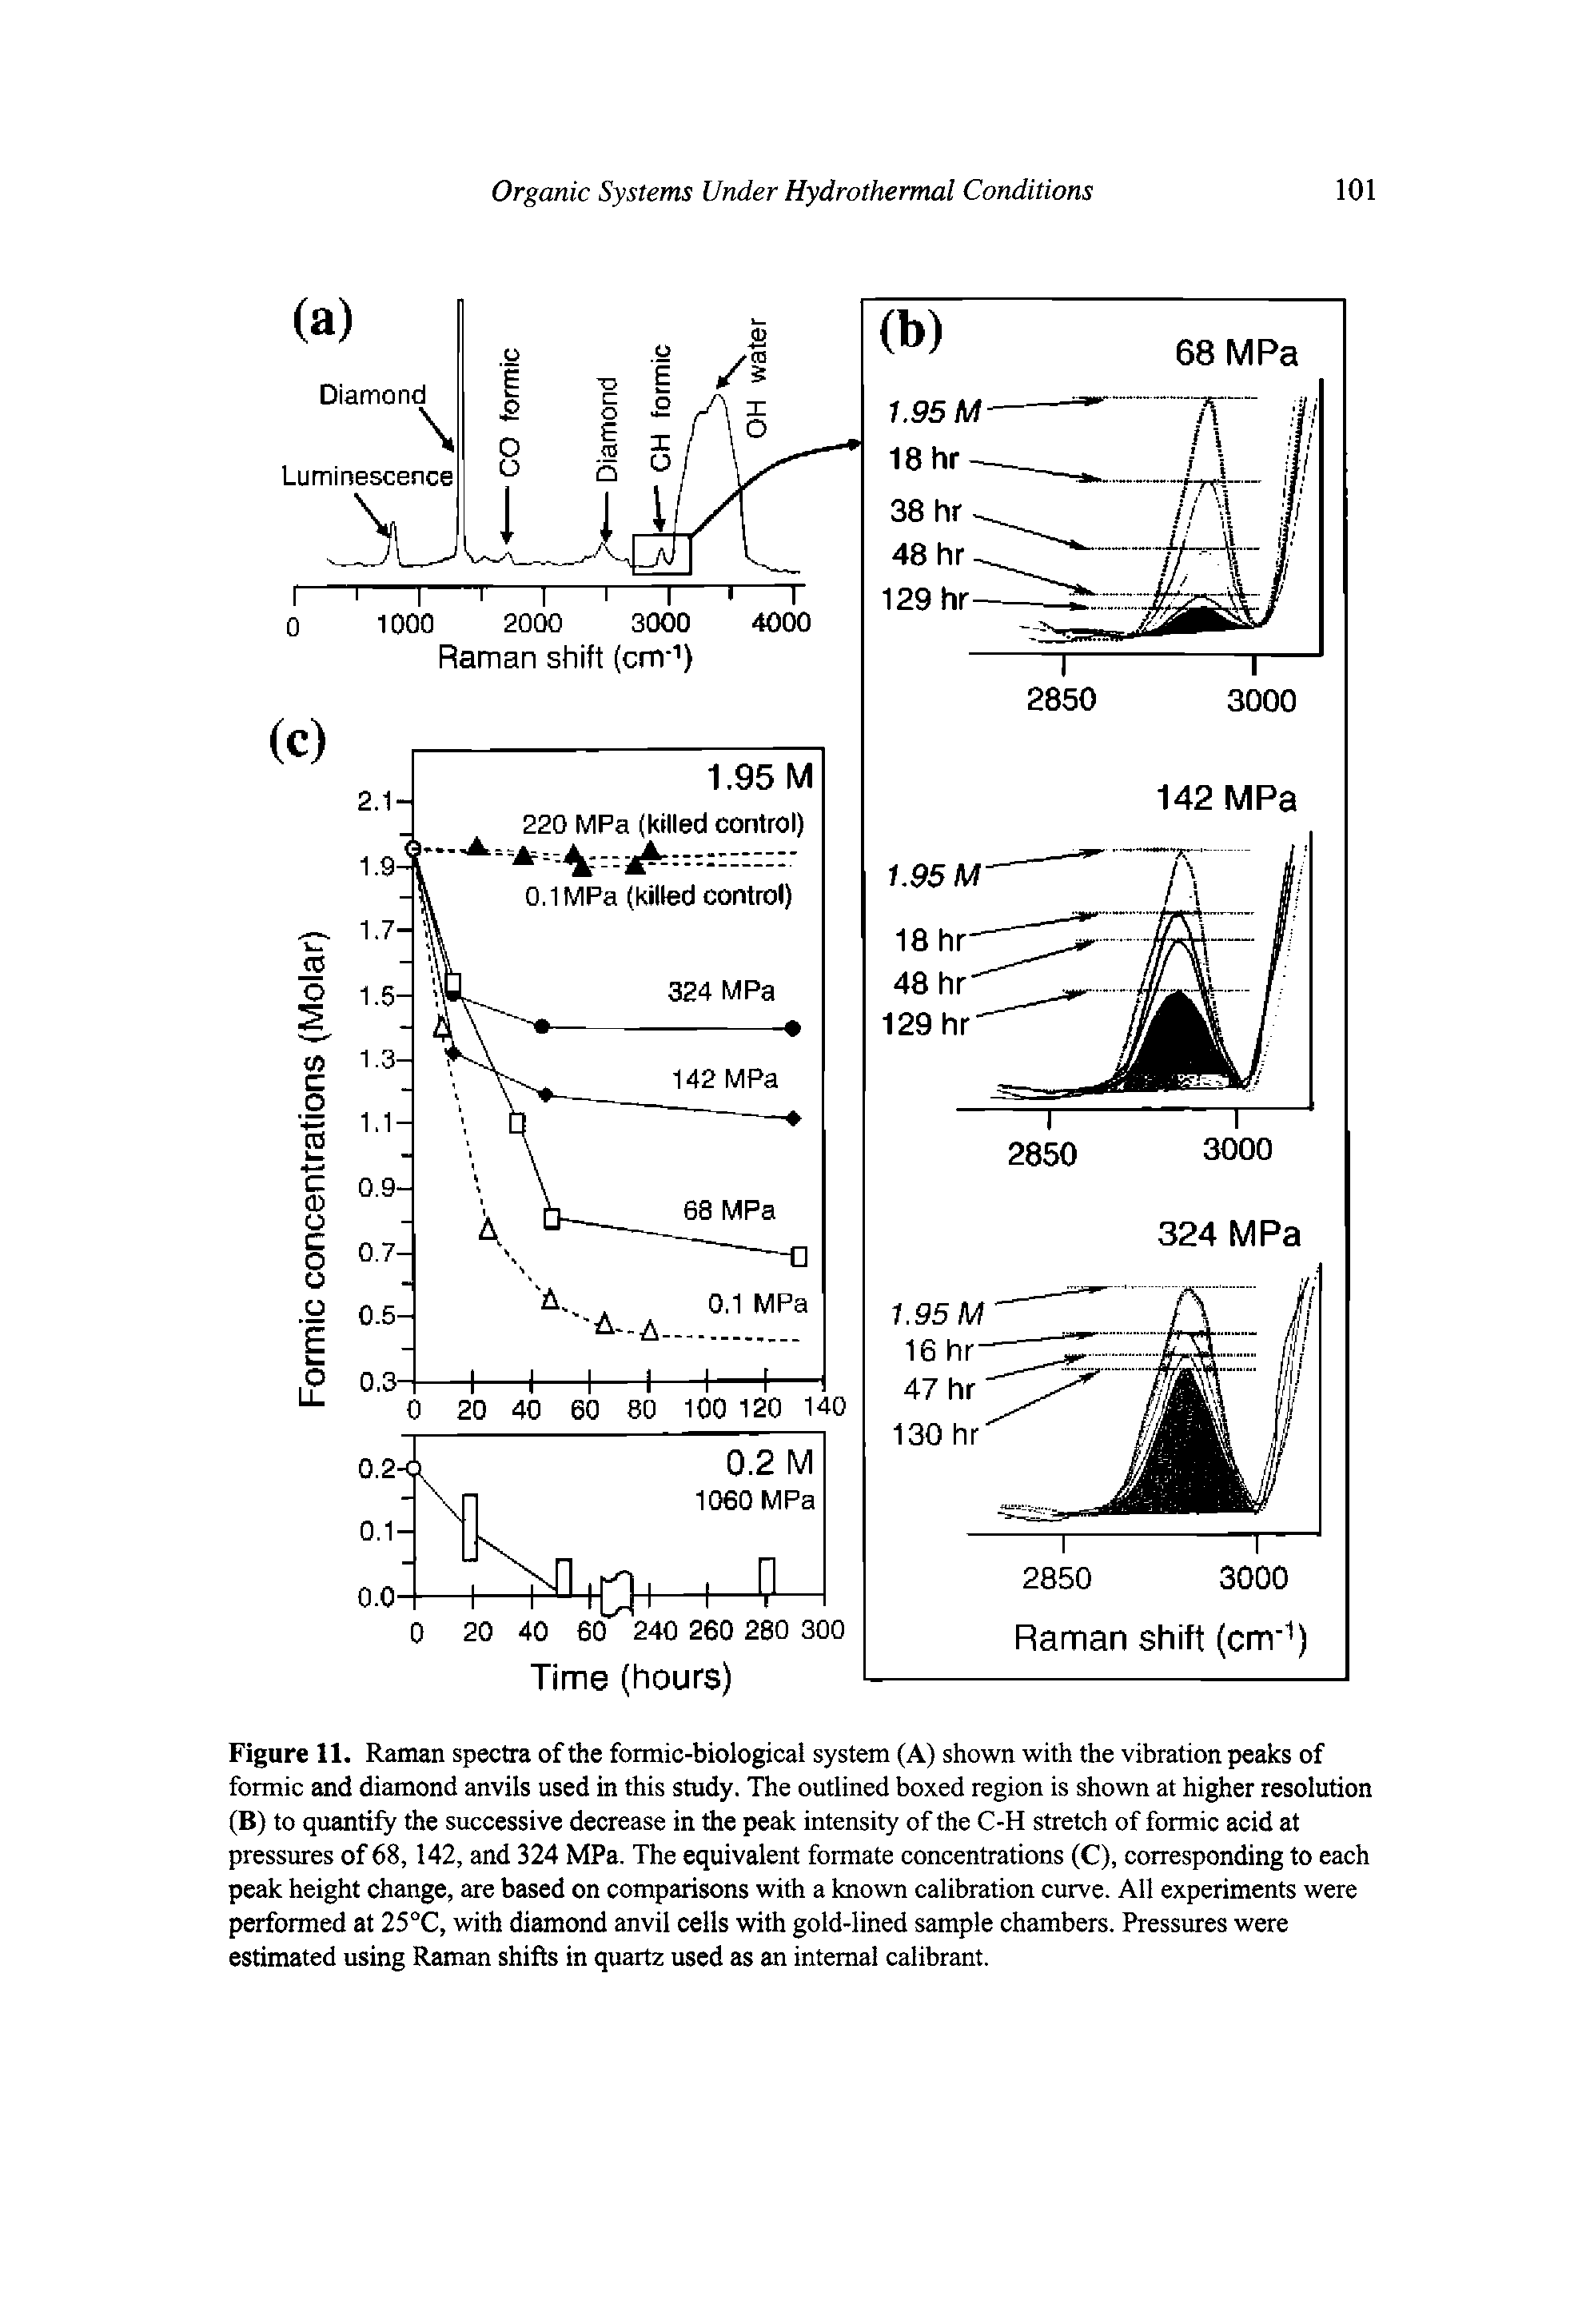 Figure 11. Raman spectra of the formic-biological system (A) shown with the vibration peaks of formic and diamond anvils used in this study. The outlined boxed region is shown at higher resolution (B) to quantify the successive decrease in the peak intensity of the C-H stretch of formic acid at pressures of 68,142, and 324 MPa. The equivalent formate concentrations (C), corresponding to each peak height change, are based on comparisons with a known calibration curve. All experiments were performed at 25°C, with diamond anvil cells with gold-lined sample chambers. Pressures were estimated using Raman shifts in quartz used as an internal calibrant.